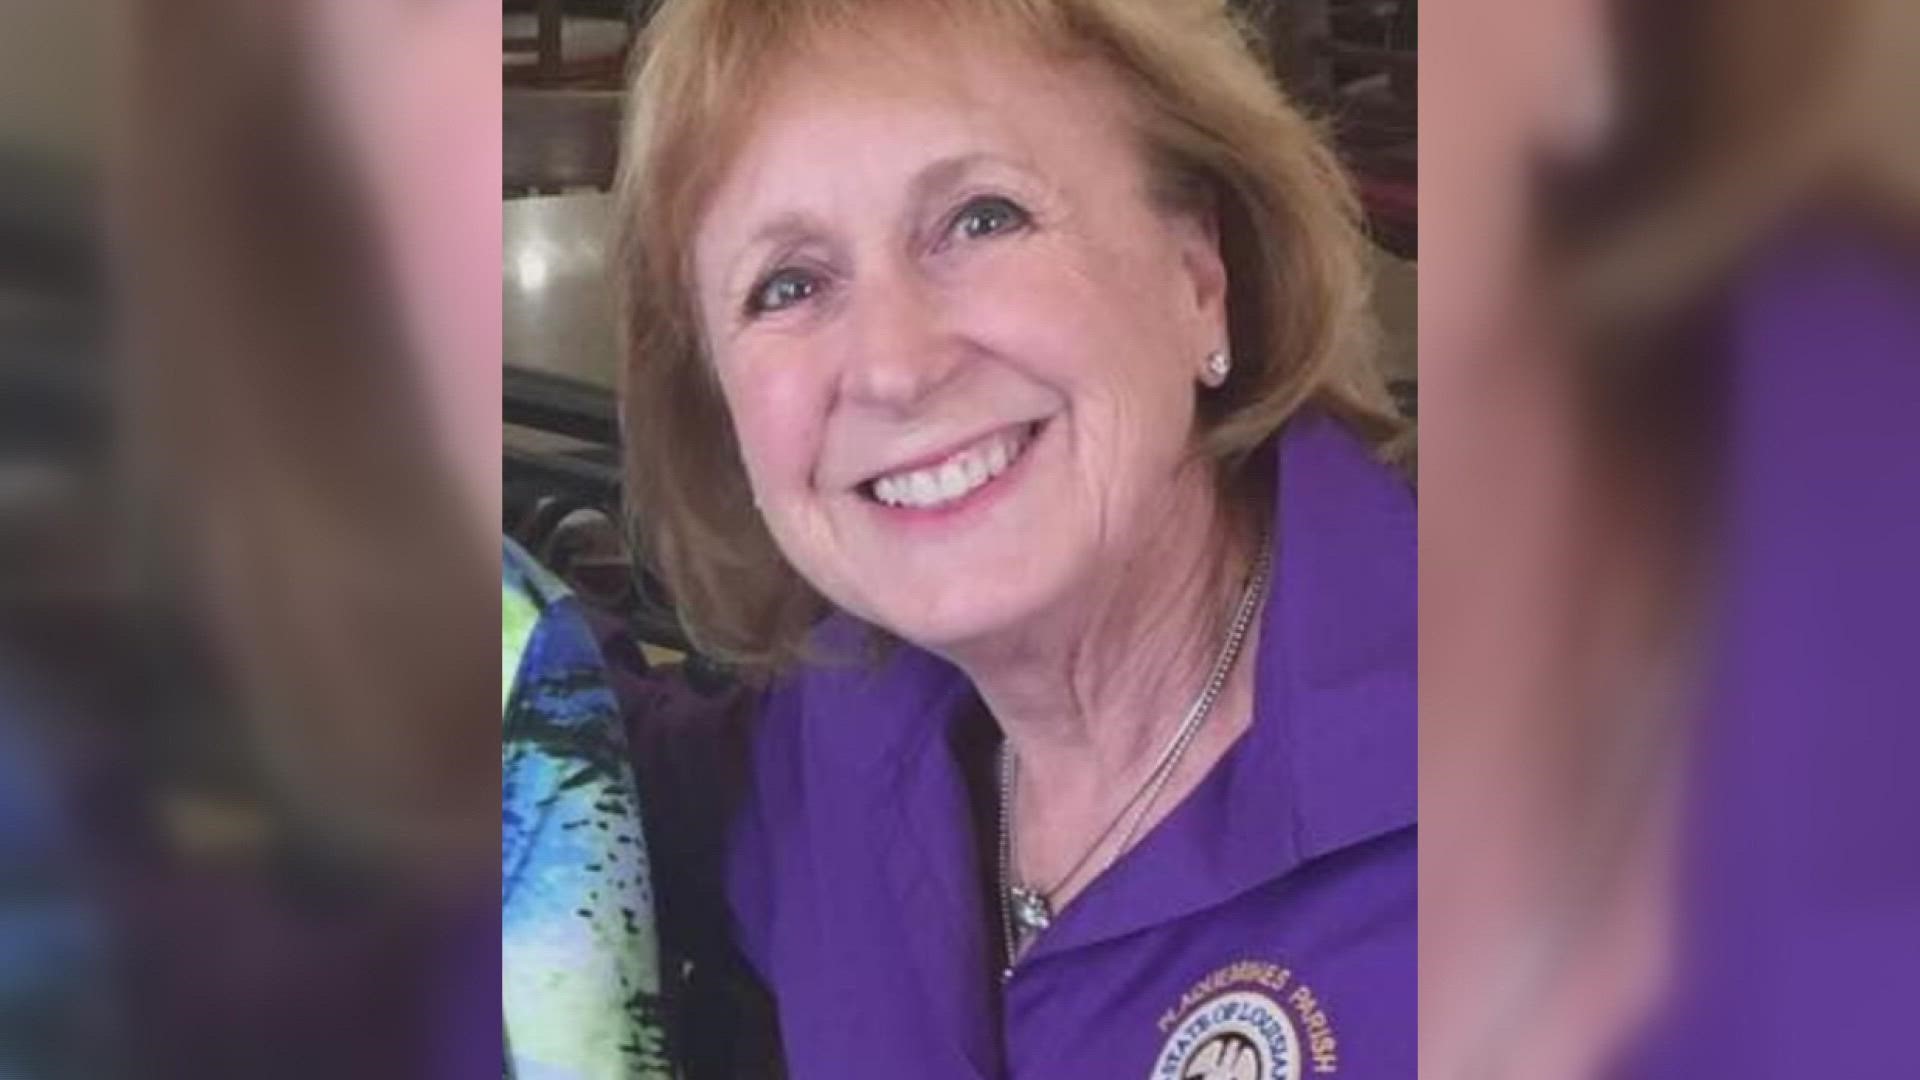 A special church service is starting for a beloved former teacher. She fell from a bridge this morning after being hit by a car.